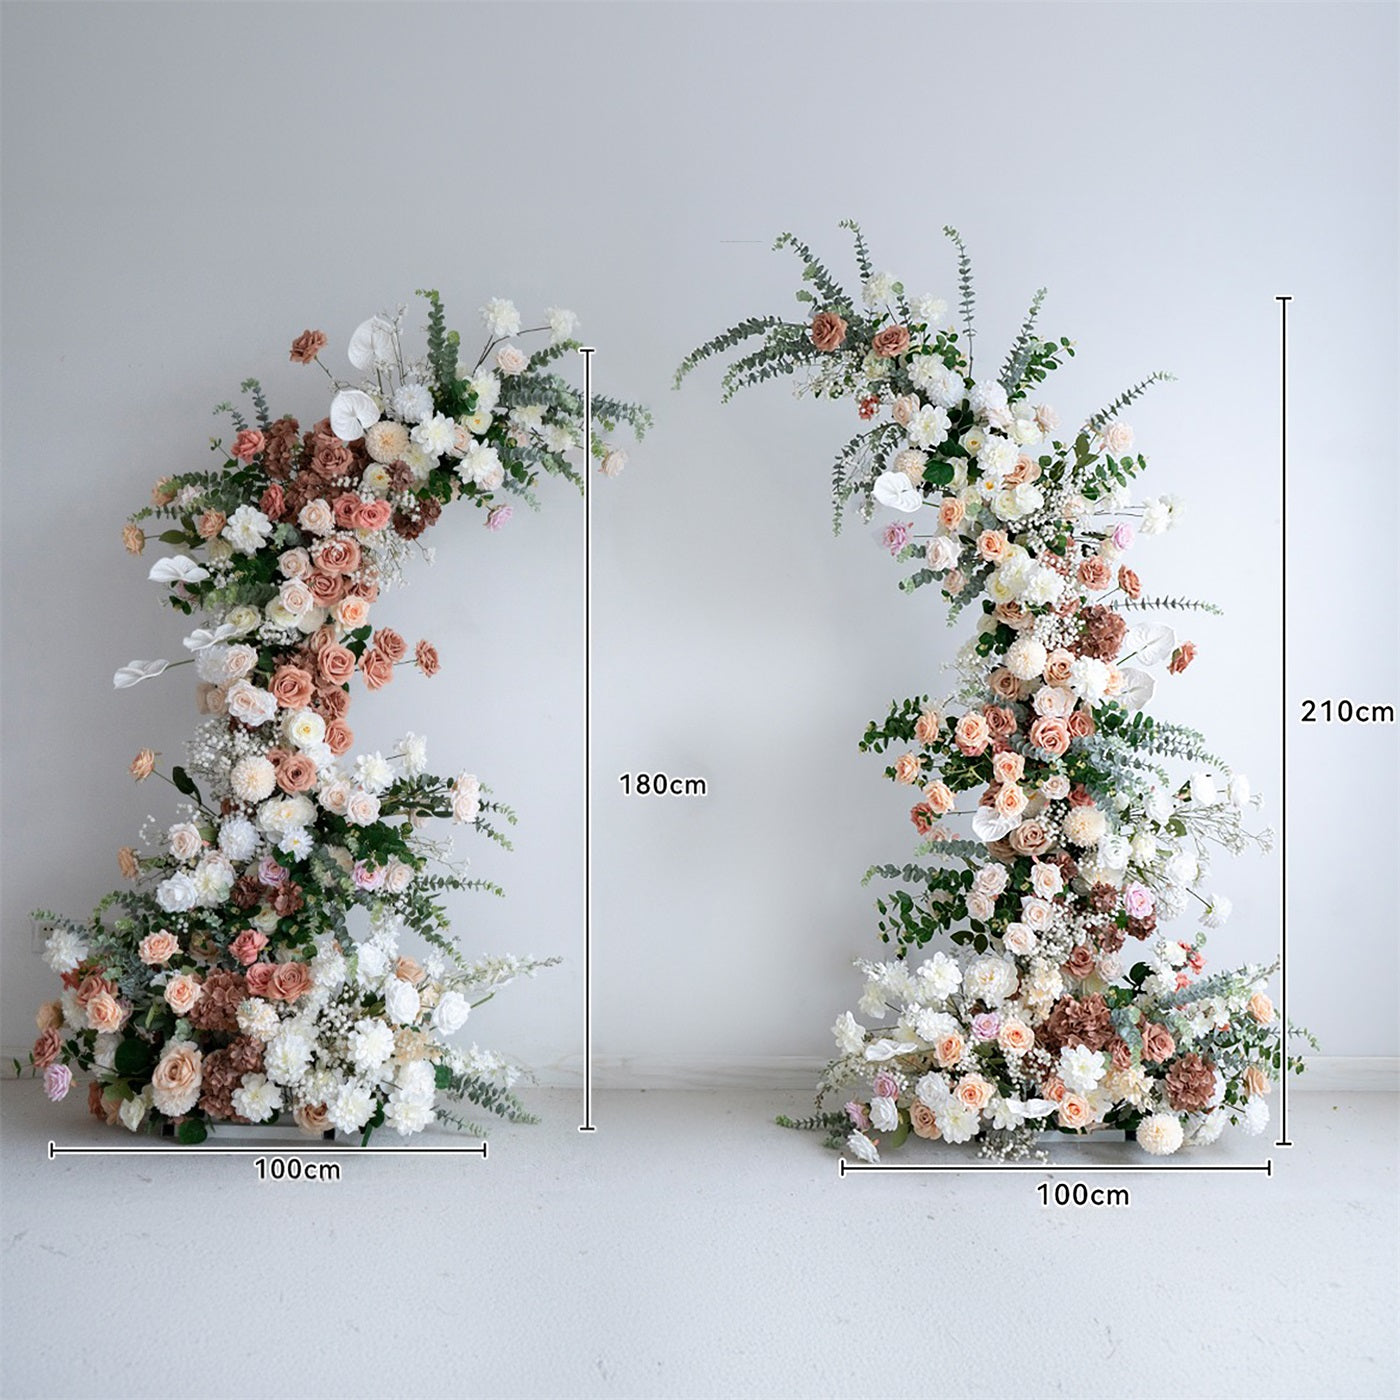 100% handmade, the coffee white flower arch provides a lifelike appearance and is easy to set up.